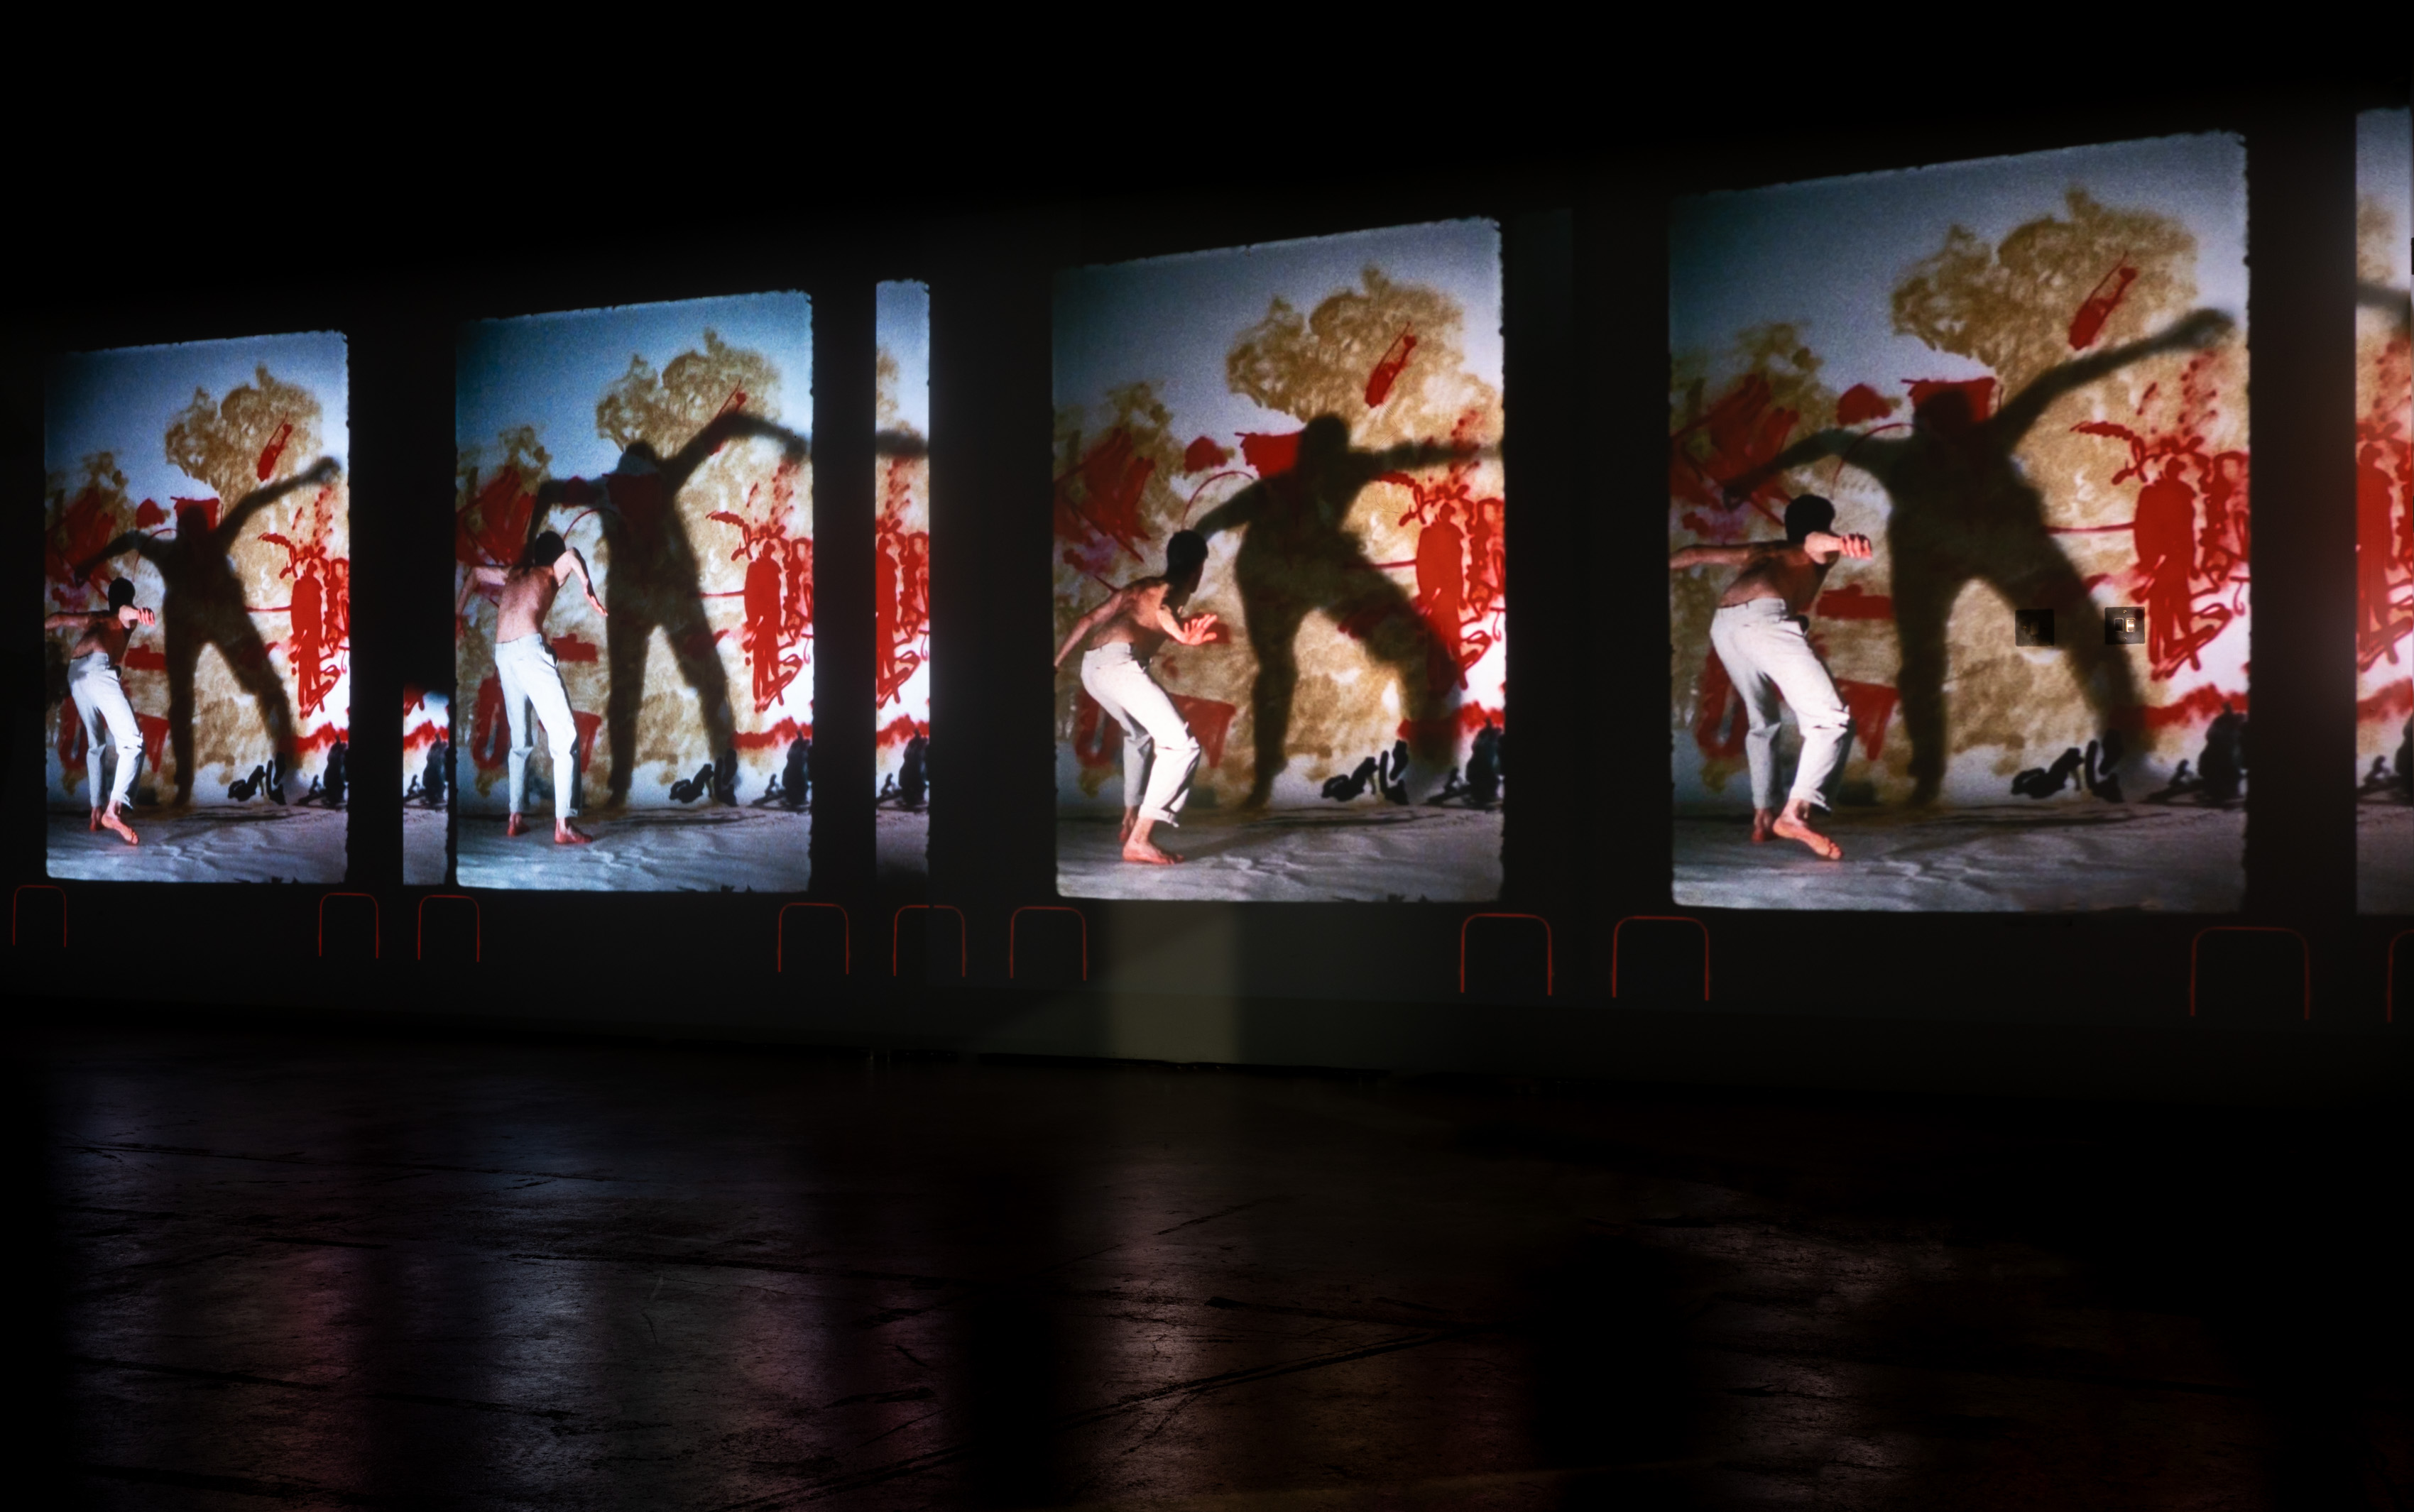 A large film projection installation consisting of 4 images of man dancing in different positions with a large shadow on the wall behind him